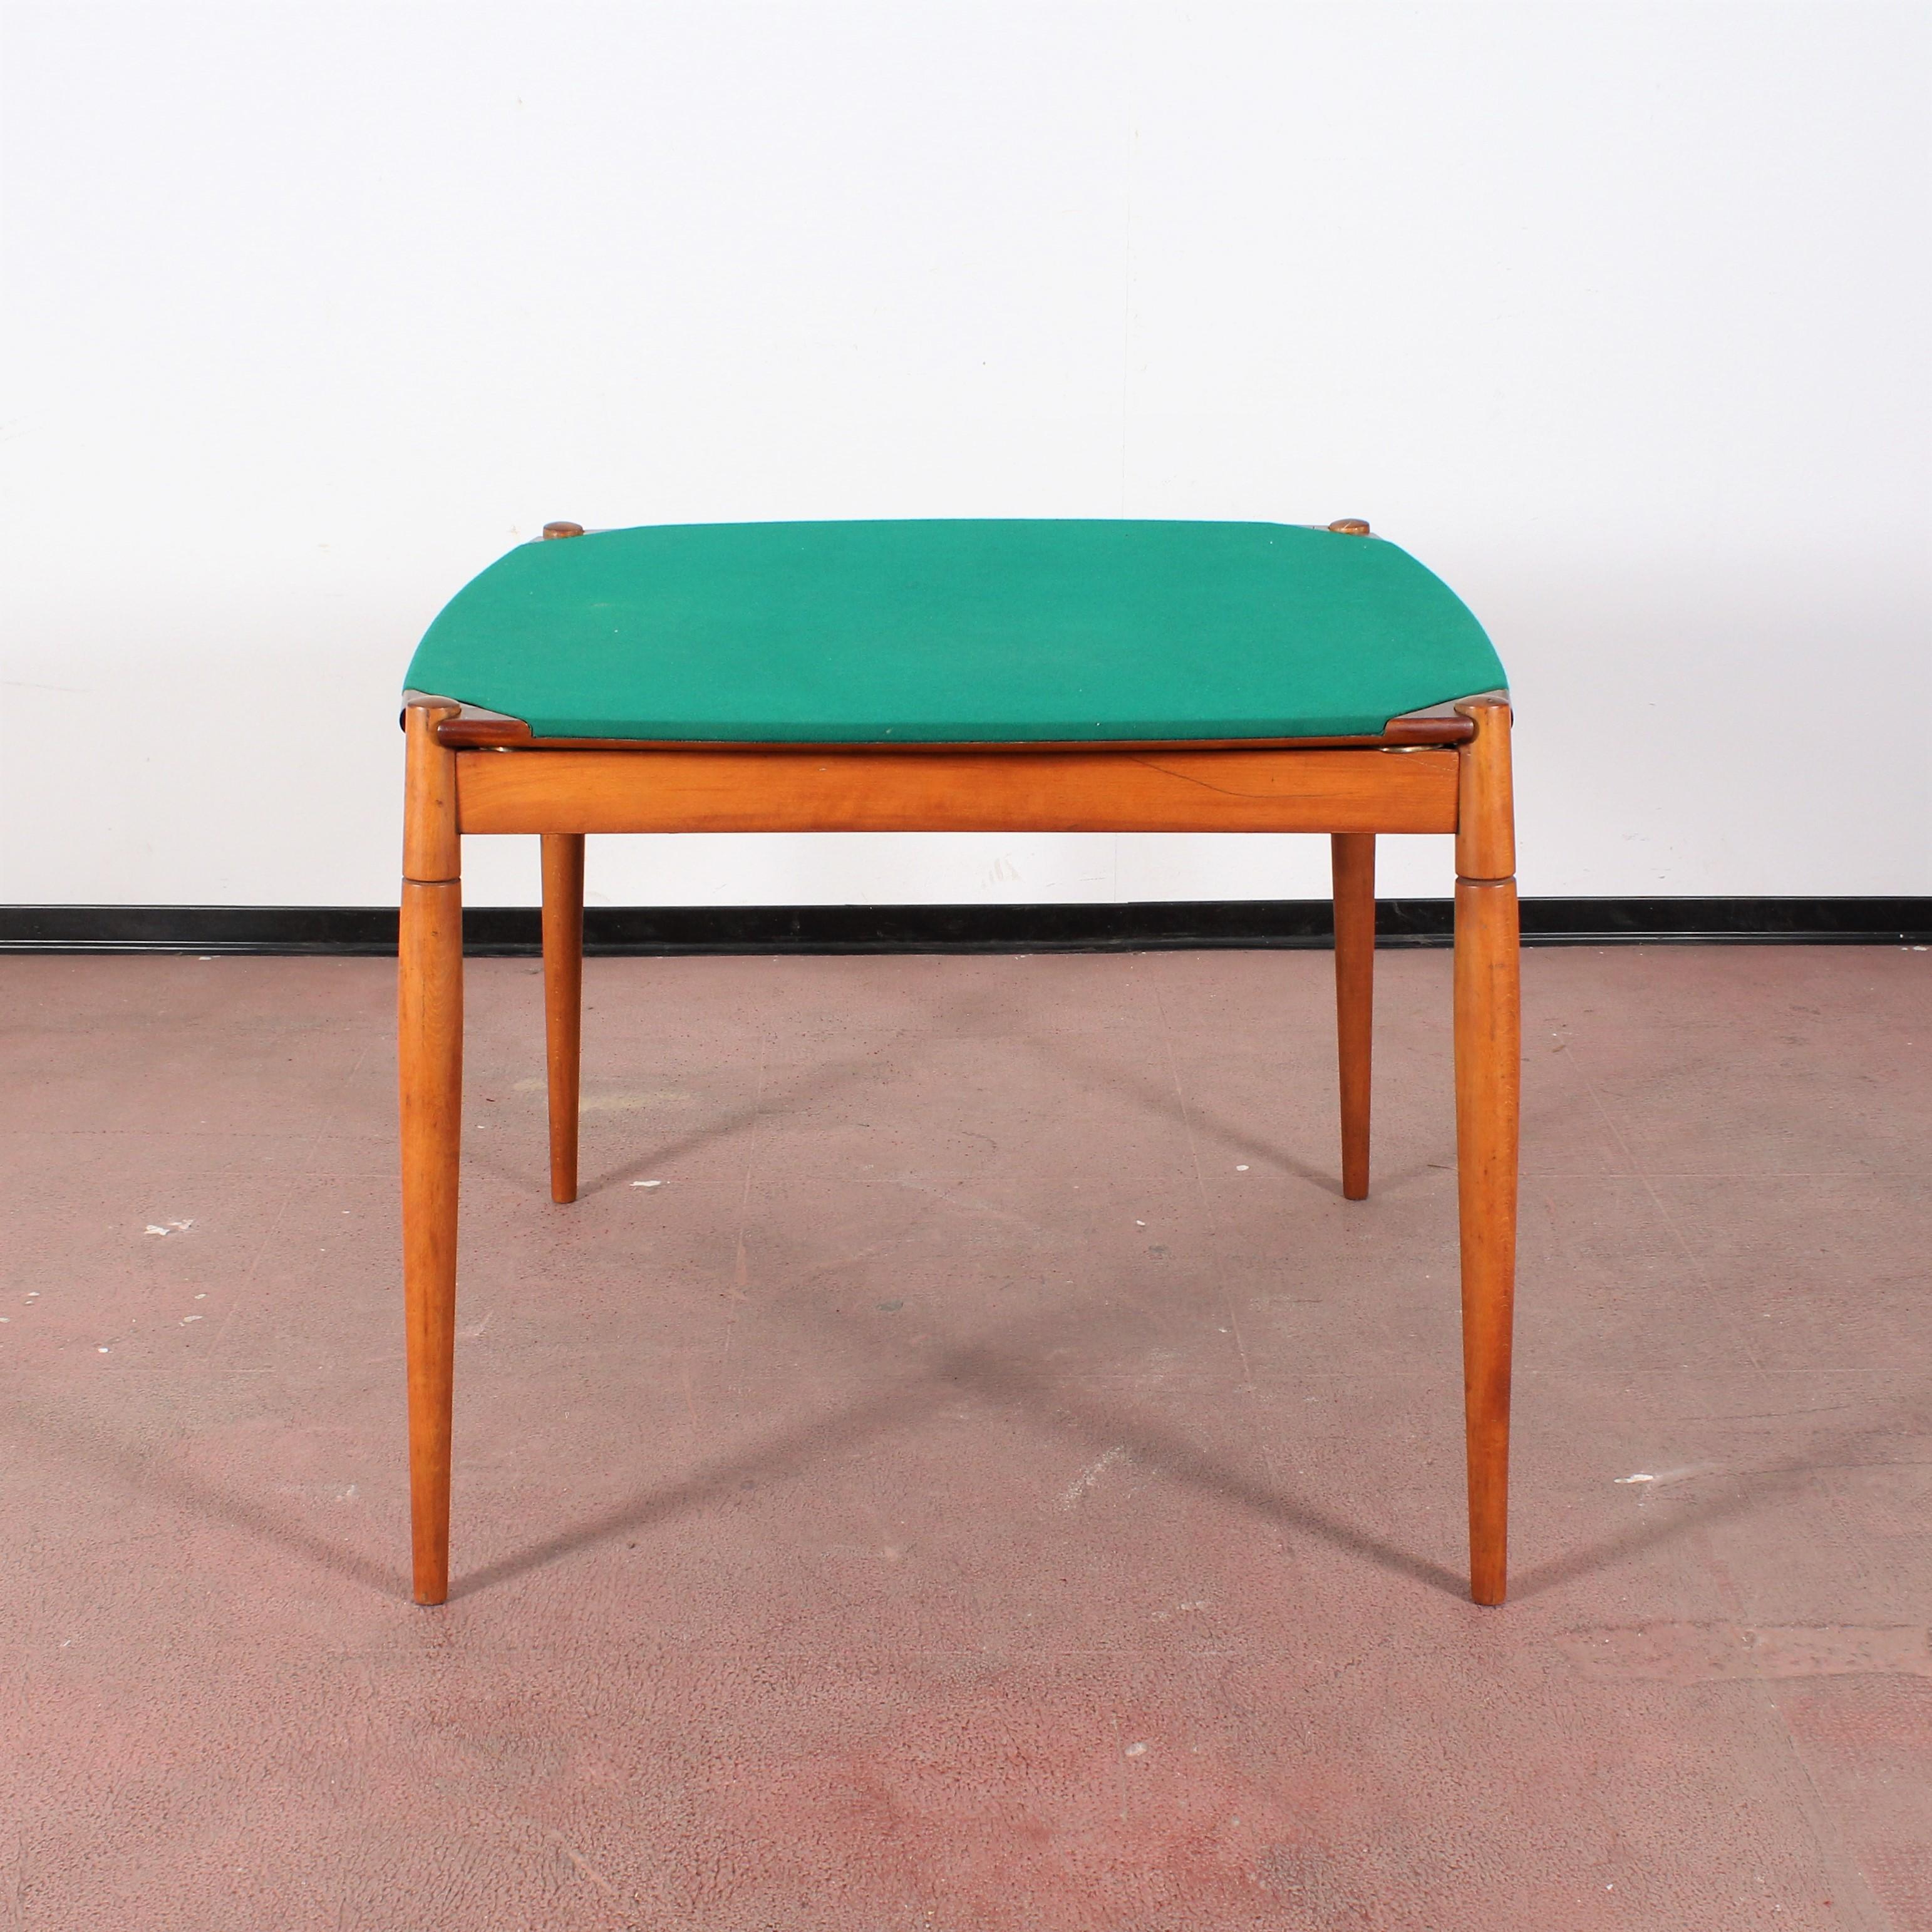 Beautiful and original poker or dining table in wood and top covered in green felt, with adjustable lateral ashtray and removable legs, created by Gio Ponti and realized by Fratelli Reguitti in 1958
Wear consistent with age and use.

         